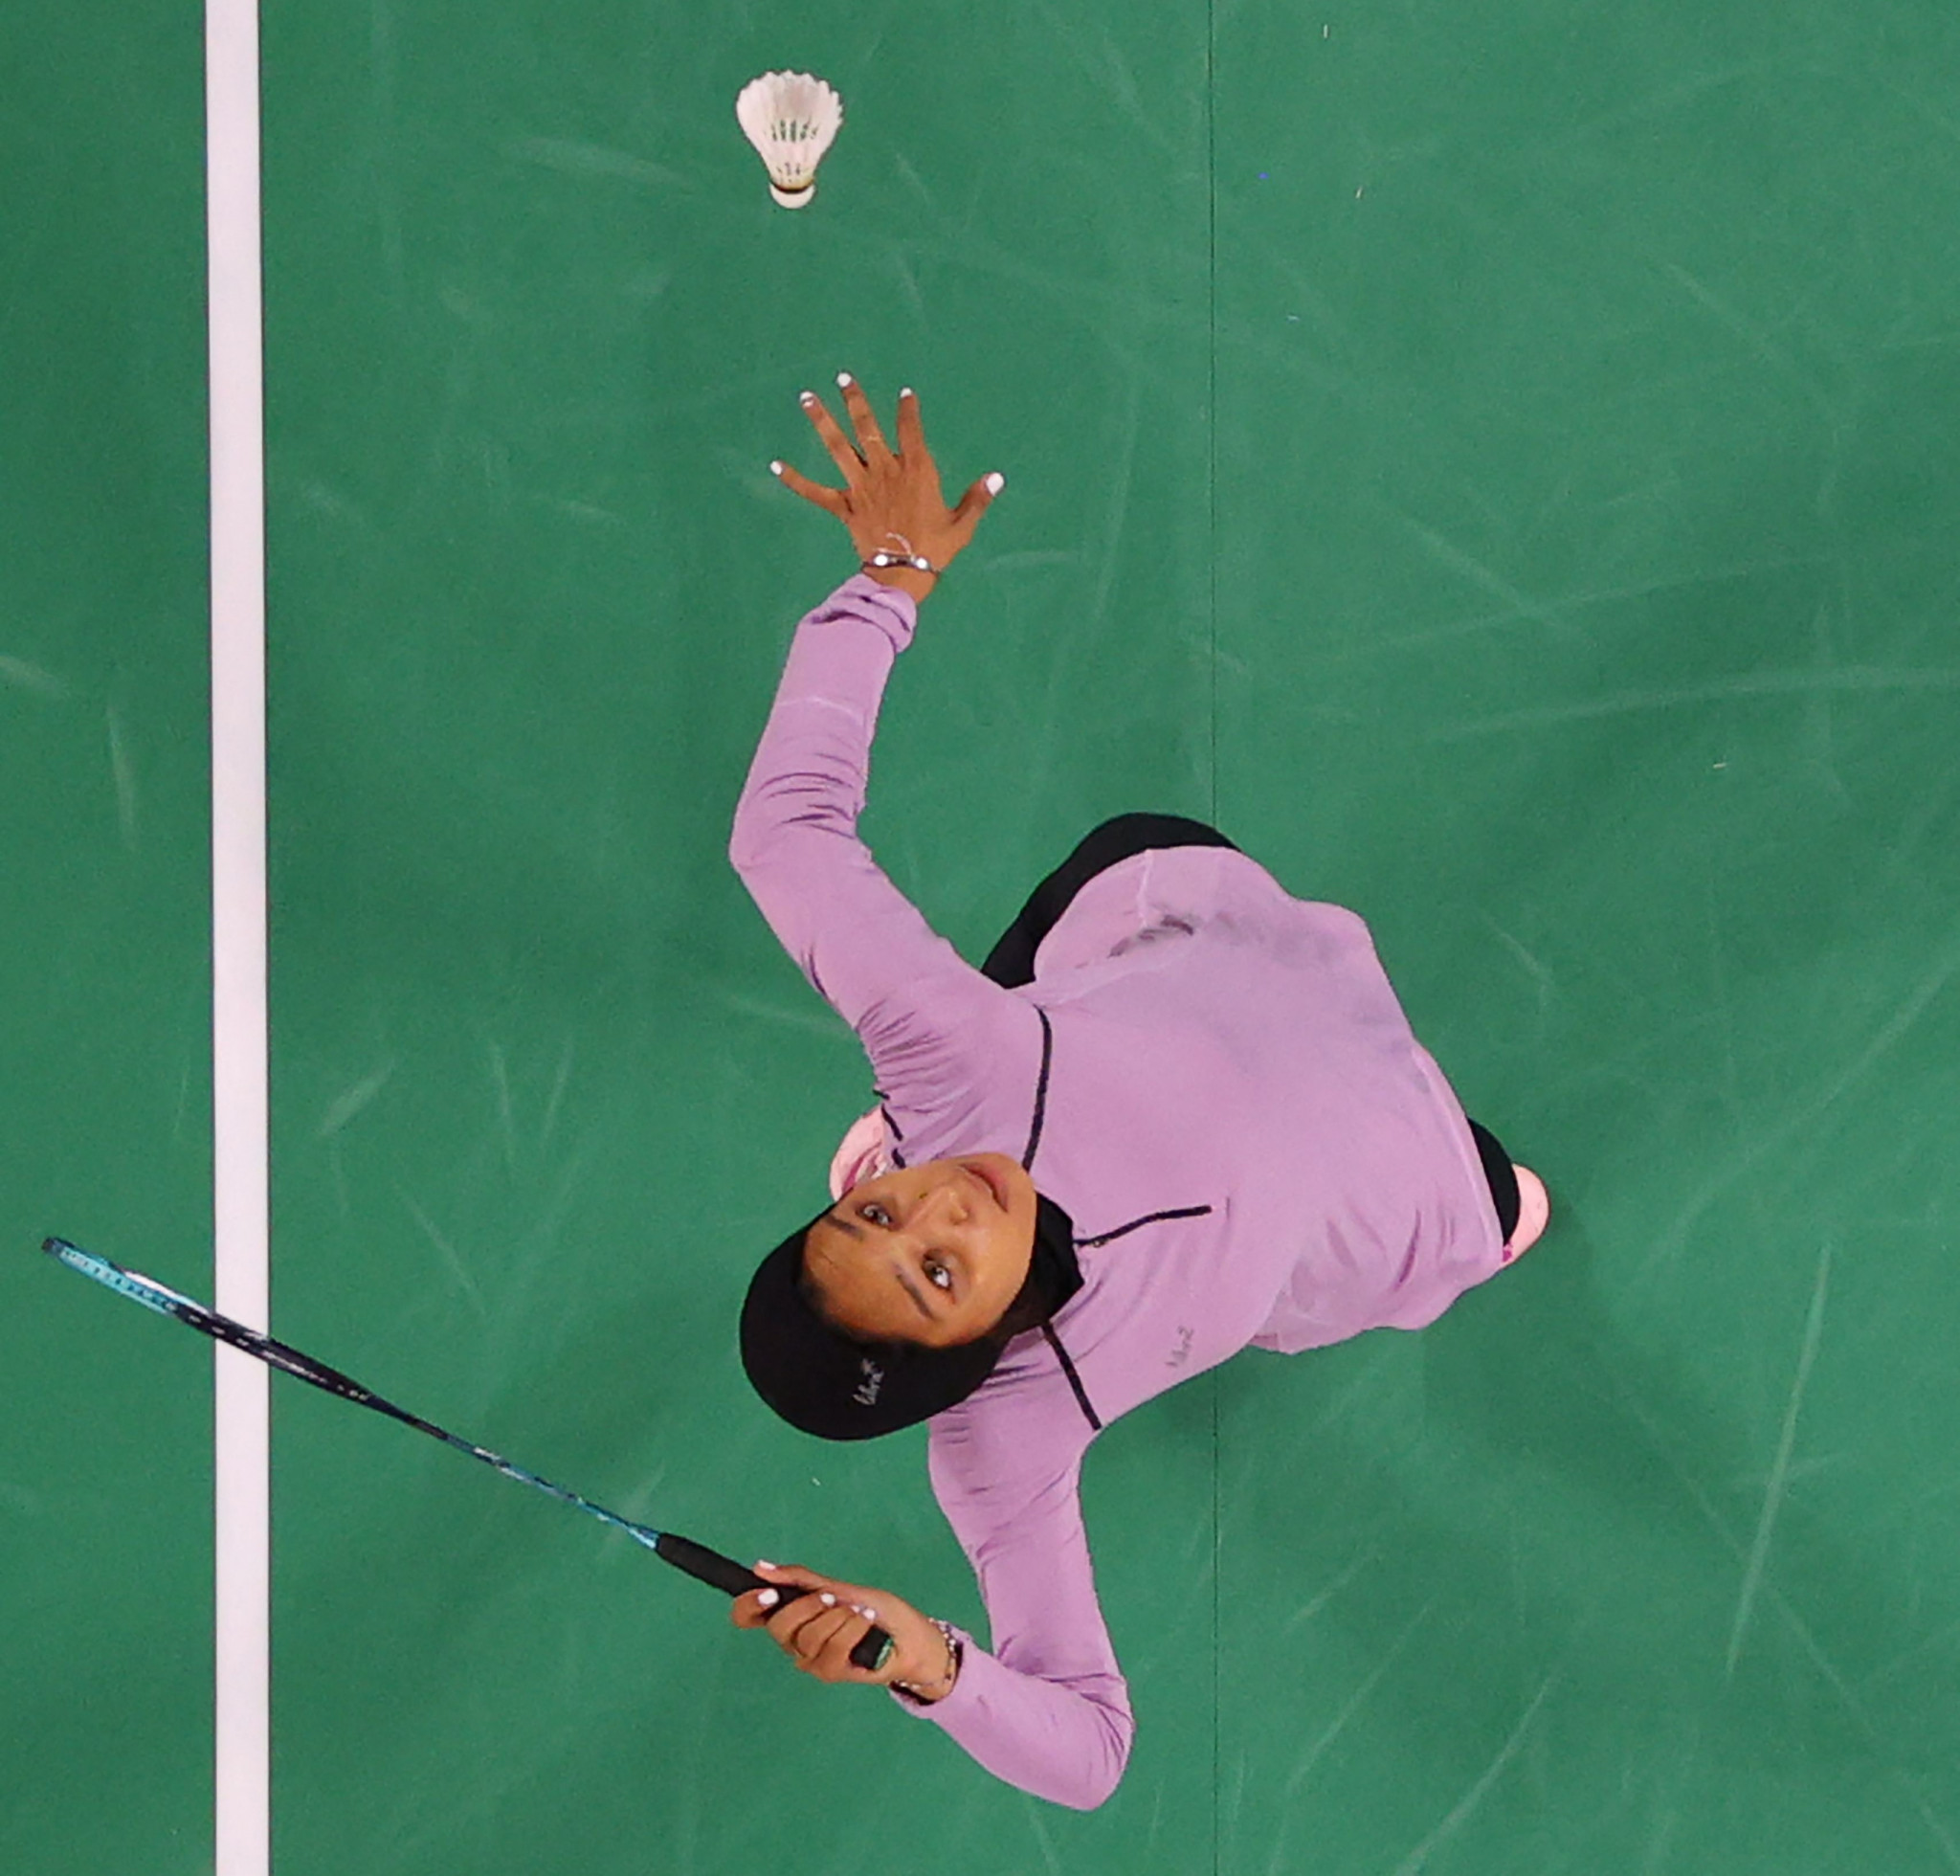 Doha Hany lost the All Africa Individual Badminton Championships women's singles final for the second year running ©Getty Images